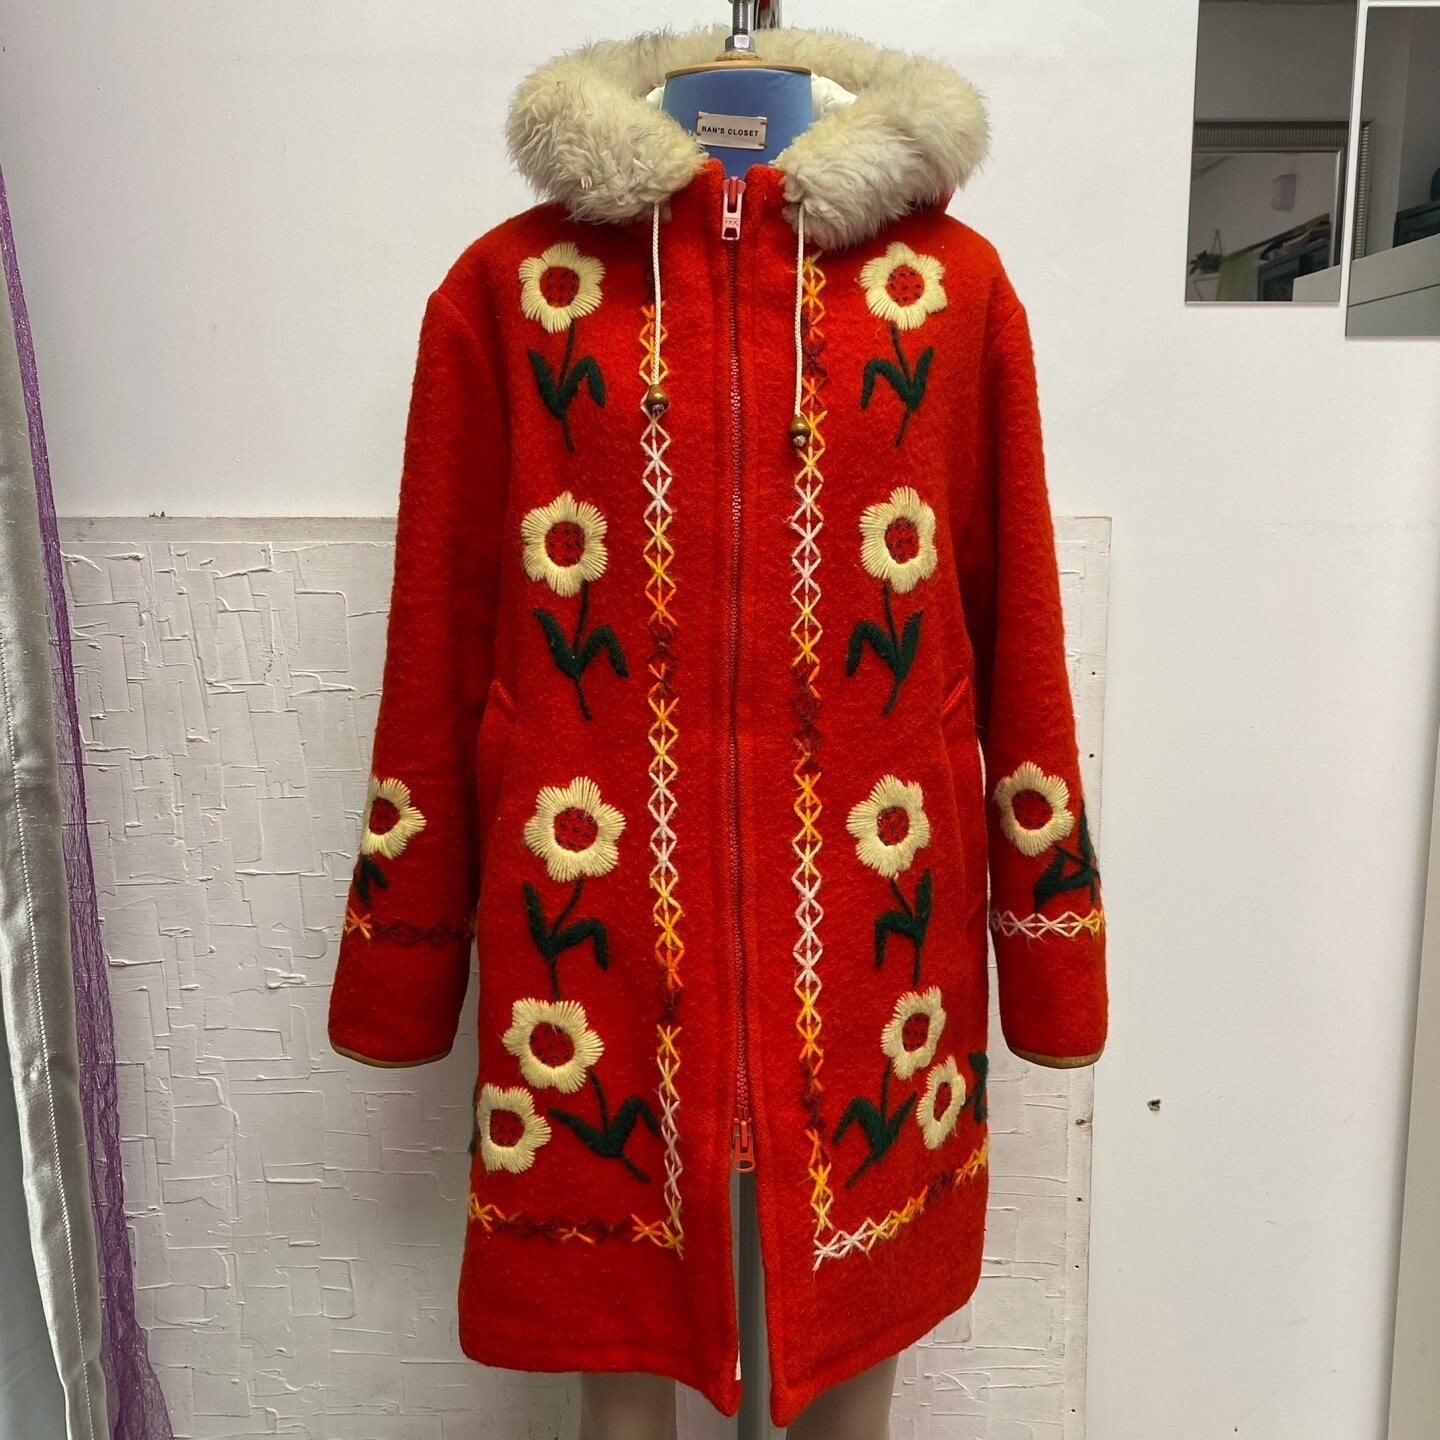 Vintage Ruby Red Hudson's Bay Wool Parka with Fur Lined Hood | Vintage Winter Parka | Flower Pattern | Quilted Lining | 100% Wool | M-3068